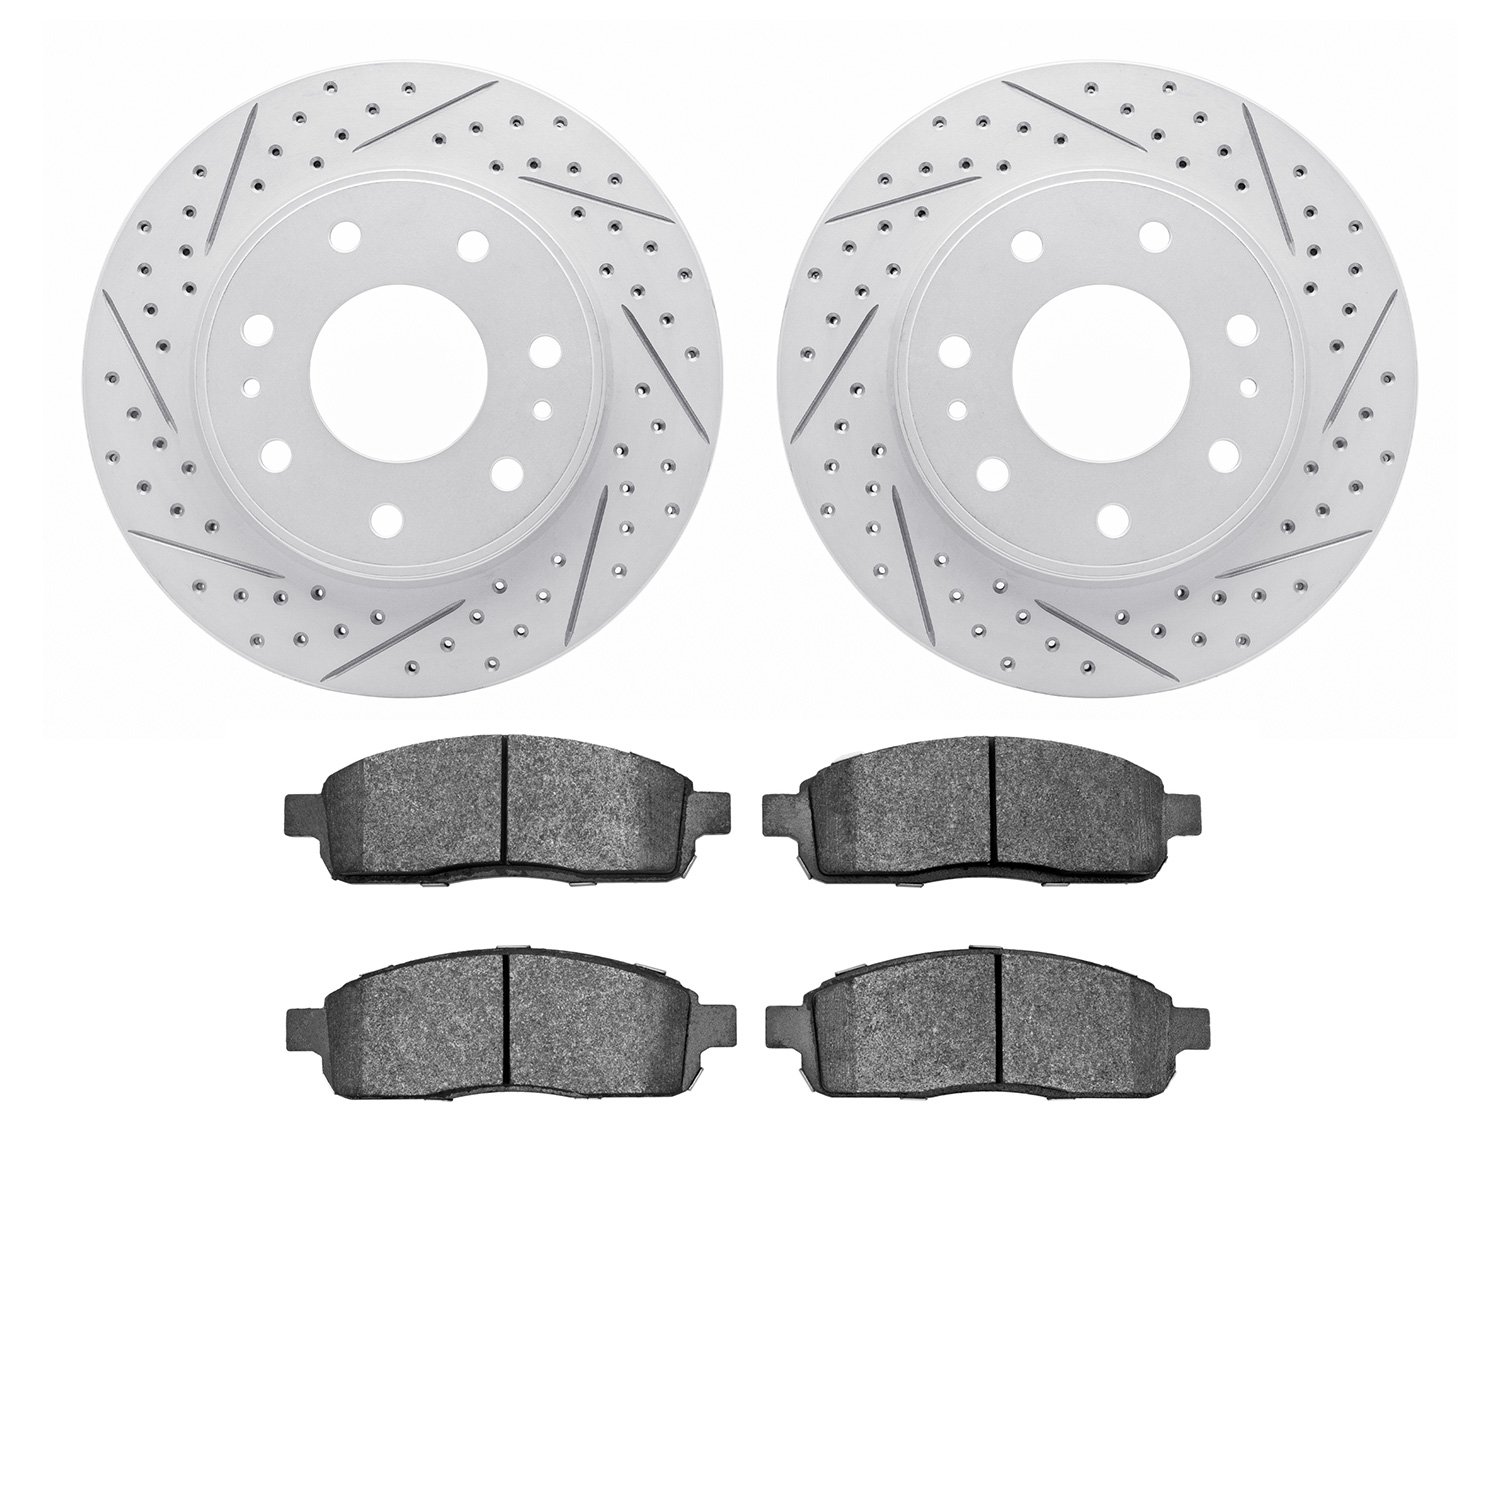 2202-99175 Geoperformance Drilled/Slotted Rotors w/Heavy-Duty Pads Kit, 2009-2009 Ford/Lincoln/Mercury/Mazda, Position: Front